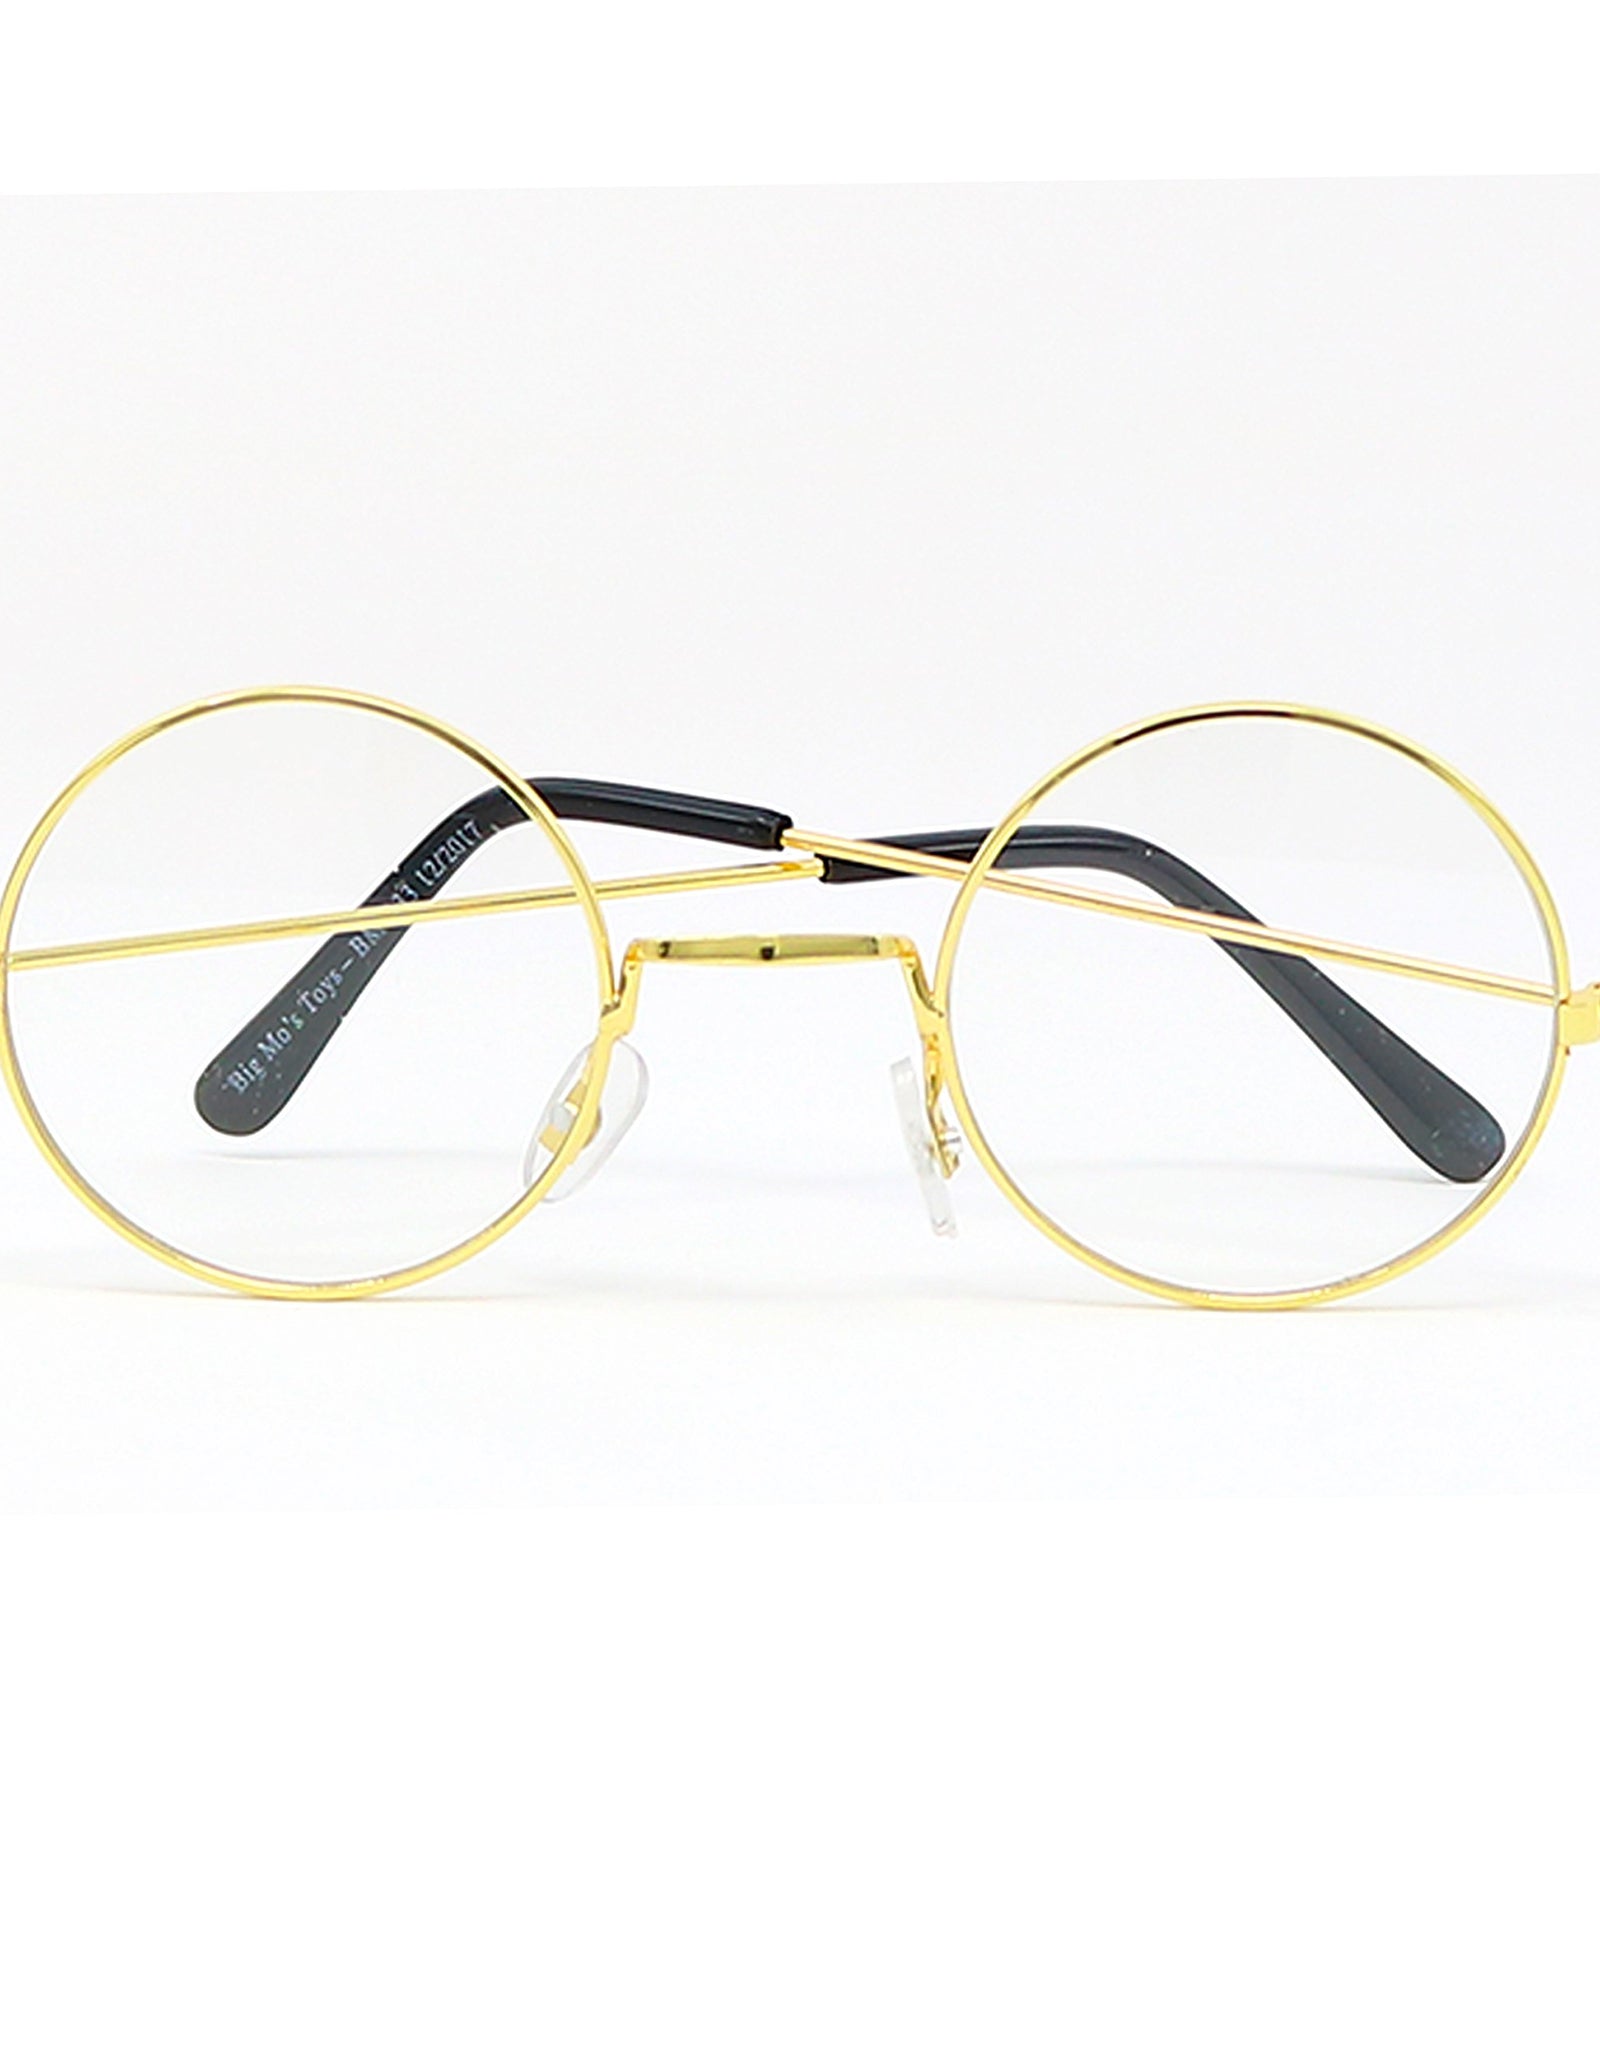 Gold Rimmed Round Costume Glasses - 1 Pair